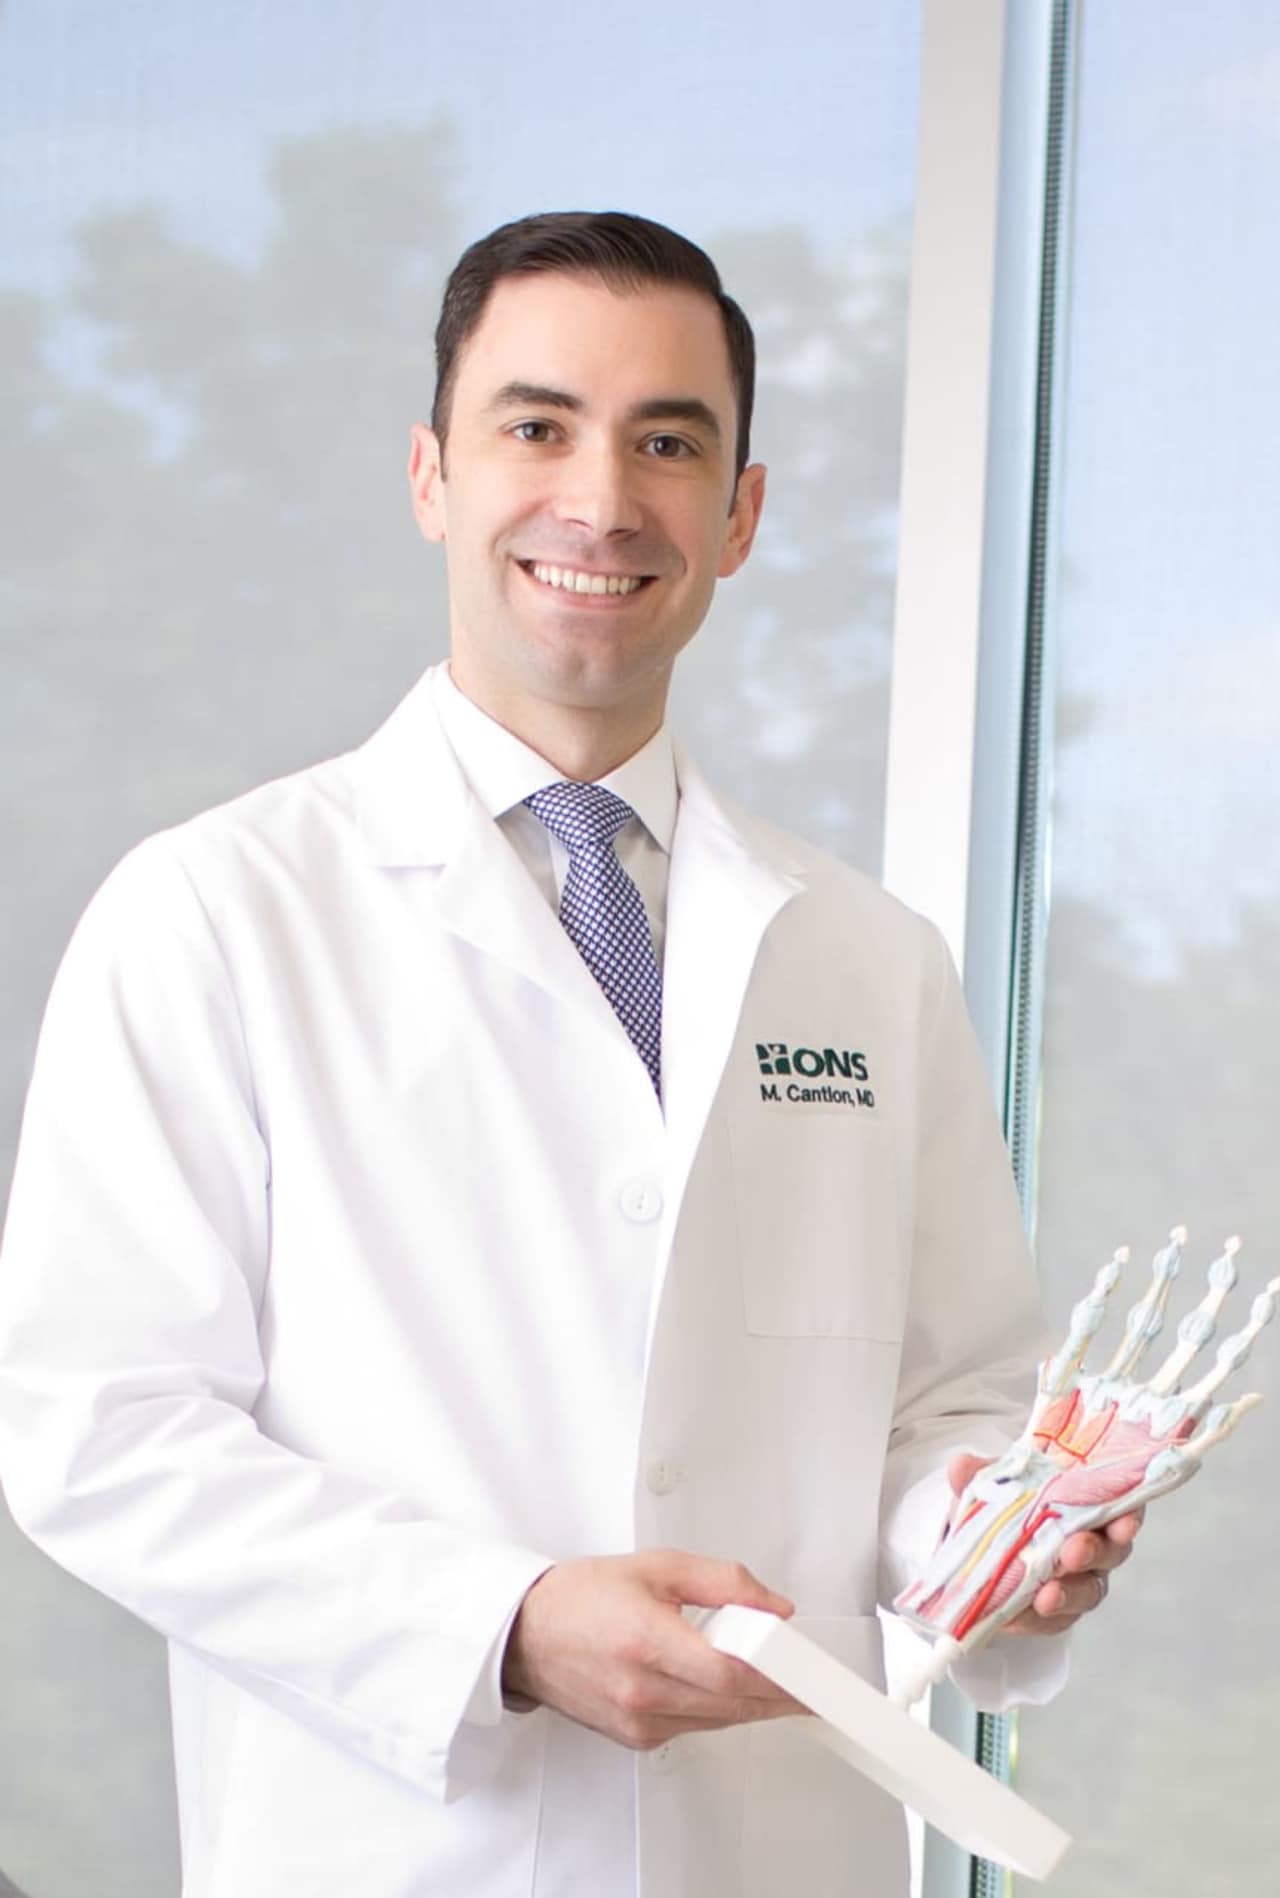 According to Dr. Matthew Cantlon on ONS, wide-awake surgery has revolutionized the way hand and wrist surgeries are performed.